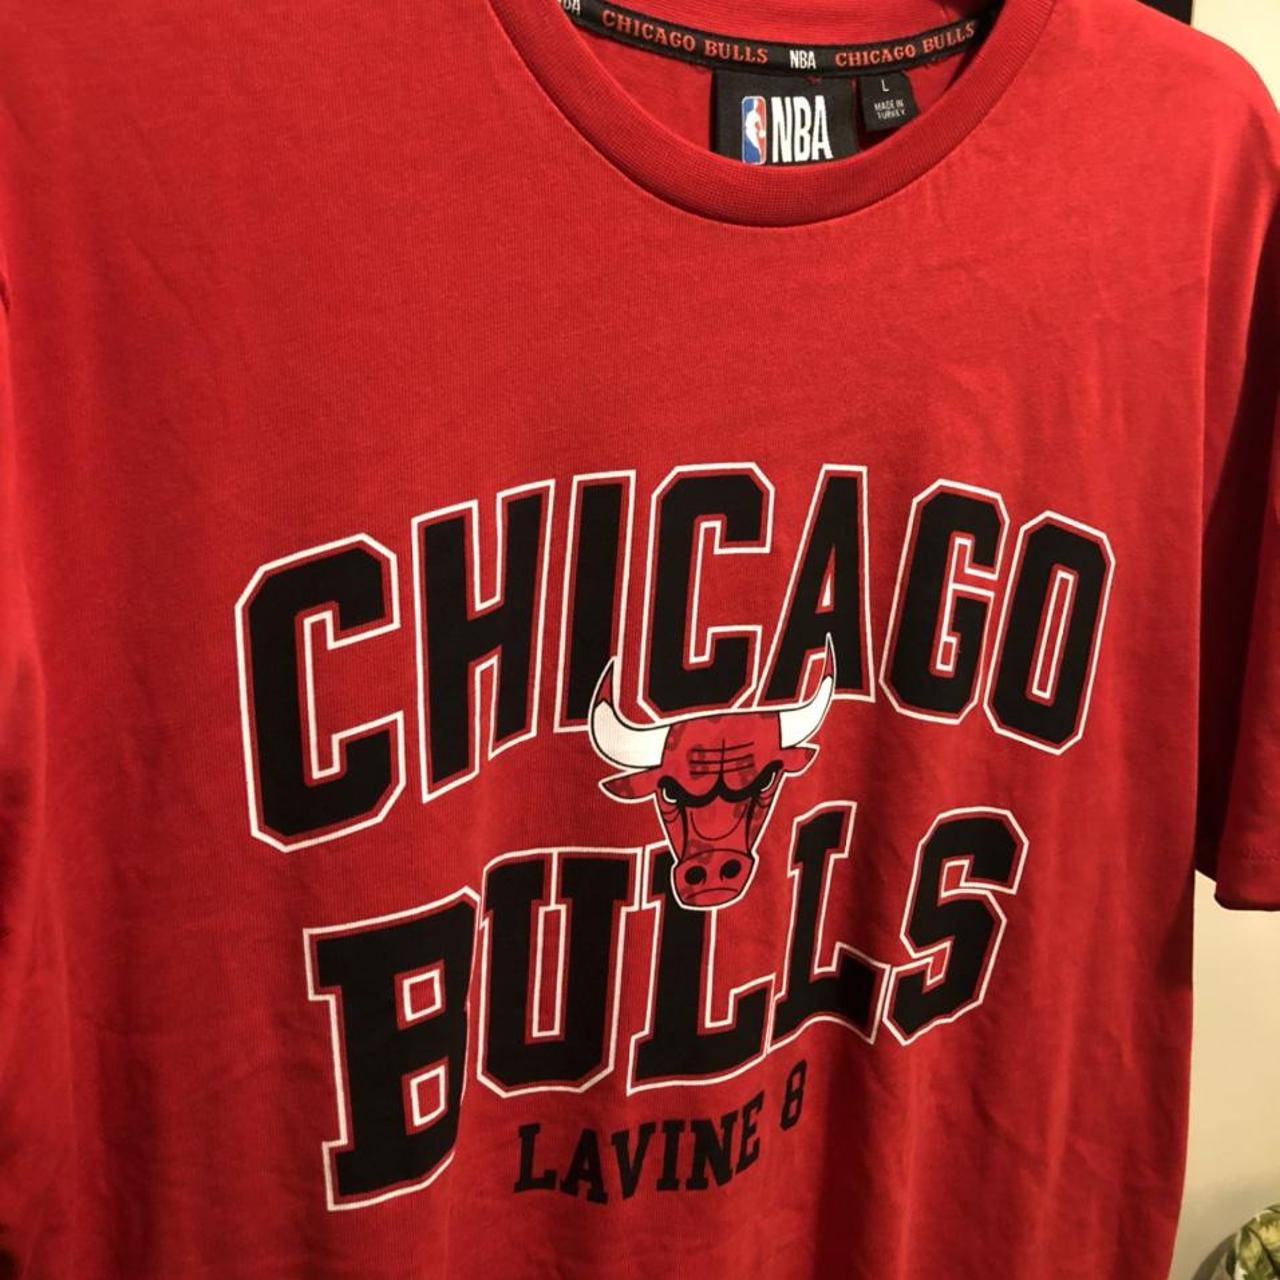 Product Image 3 - NBA Chicago Bulls T-Shirt.

Size is